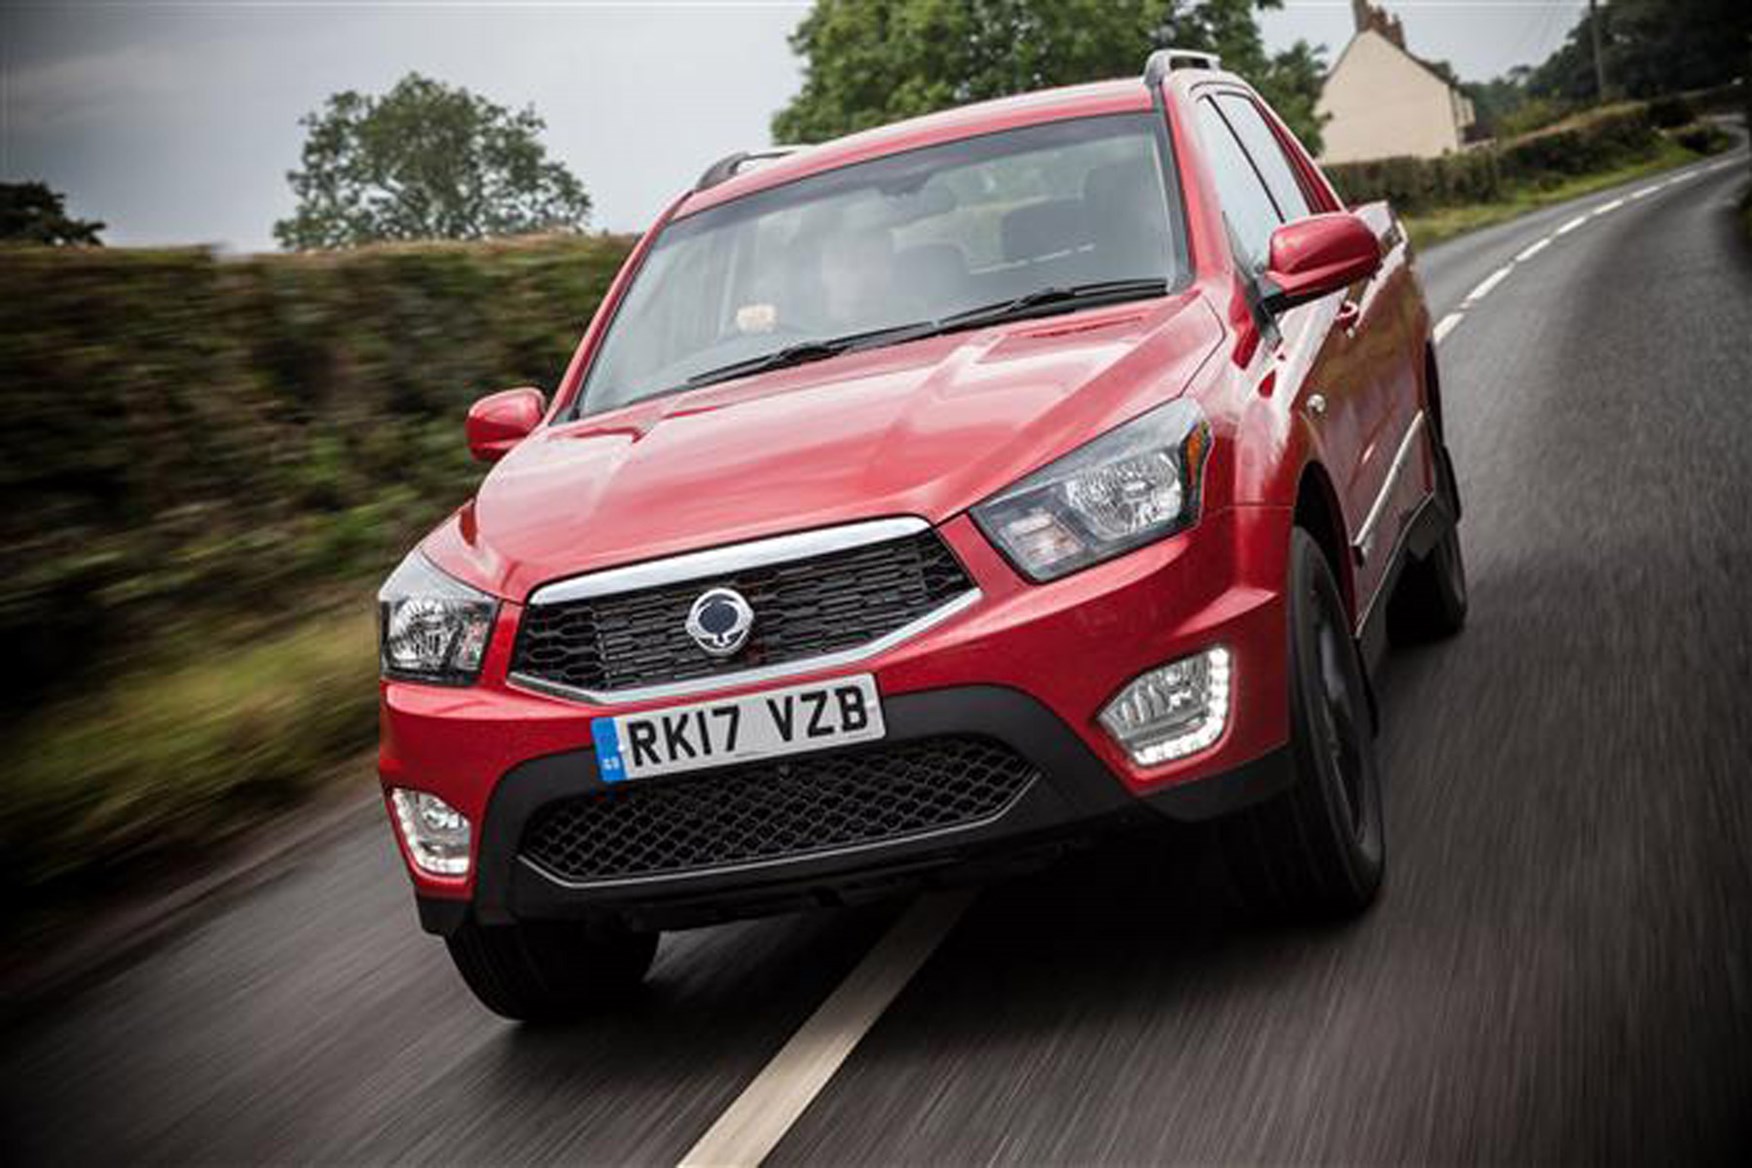 All new UK 2024 SsangYong Musso review - model changes, deals and  durability proofs with Tom! 